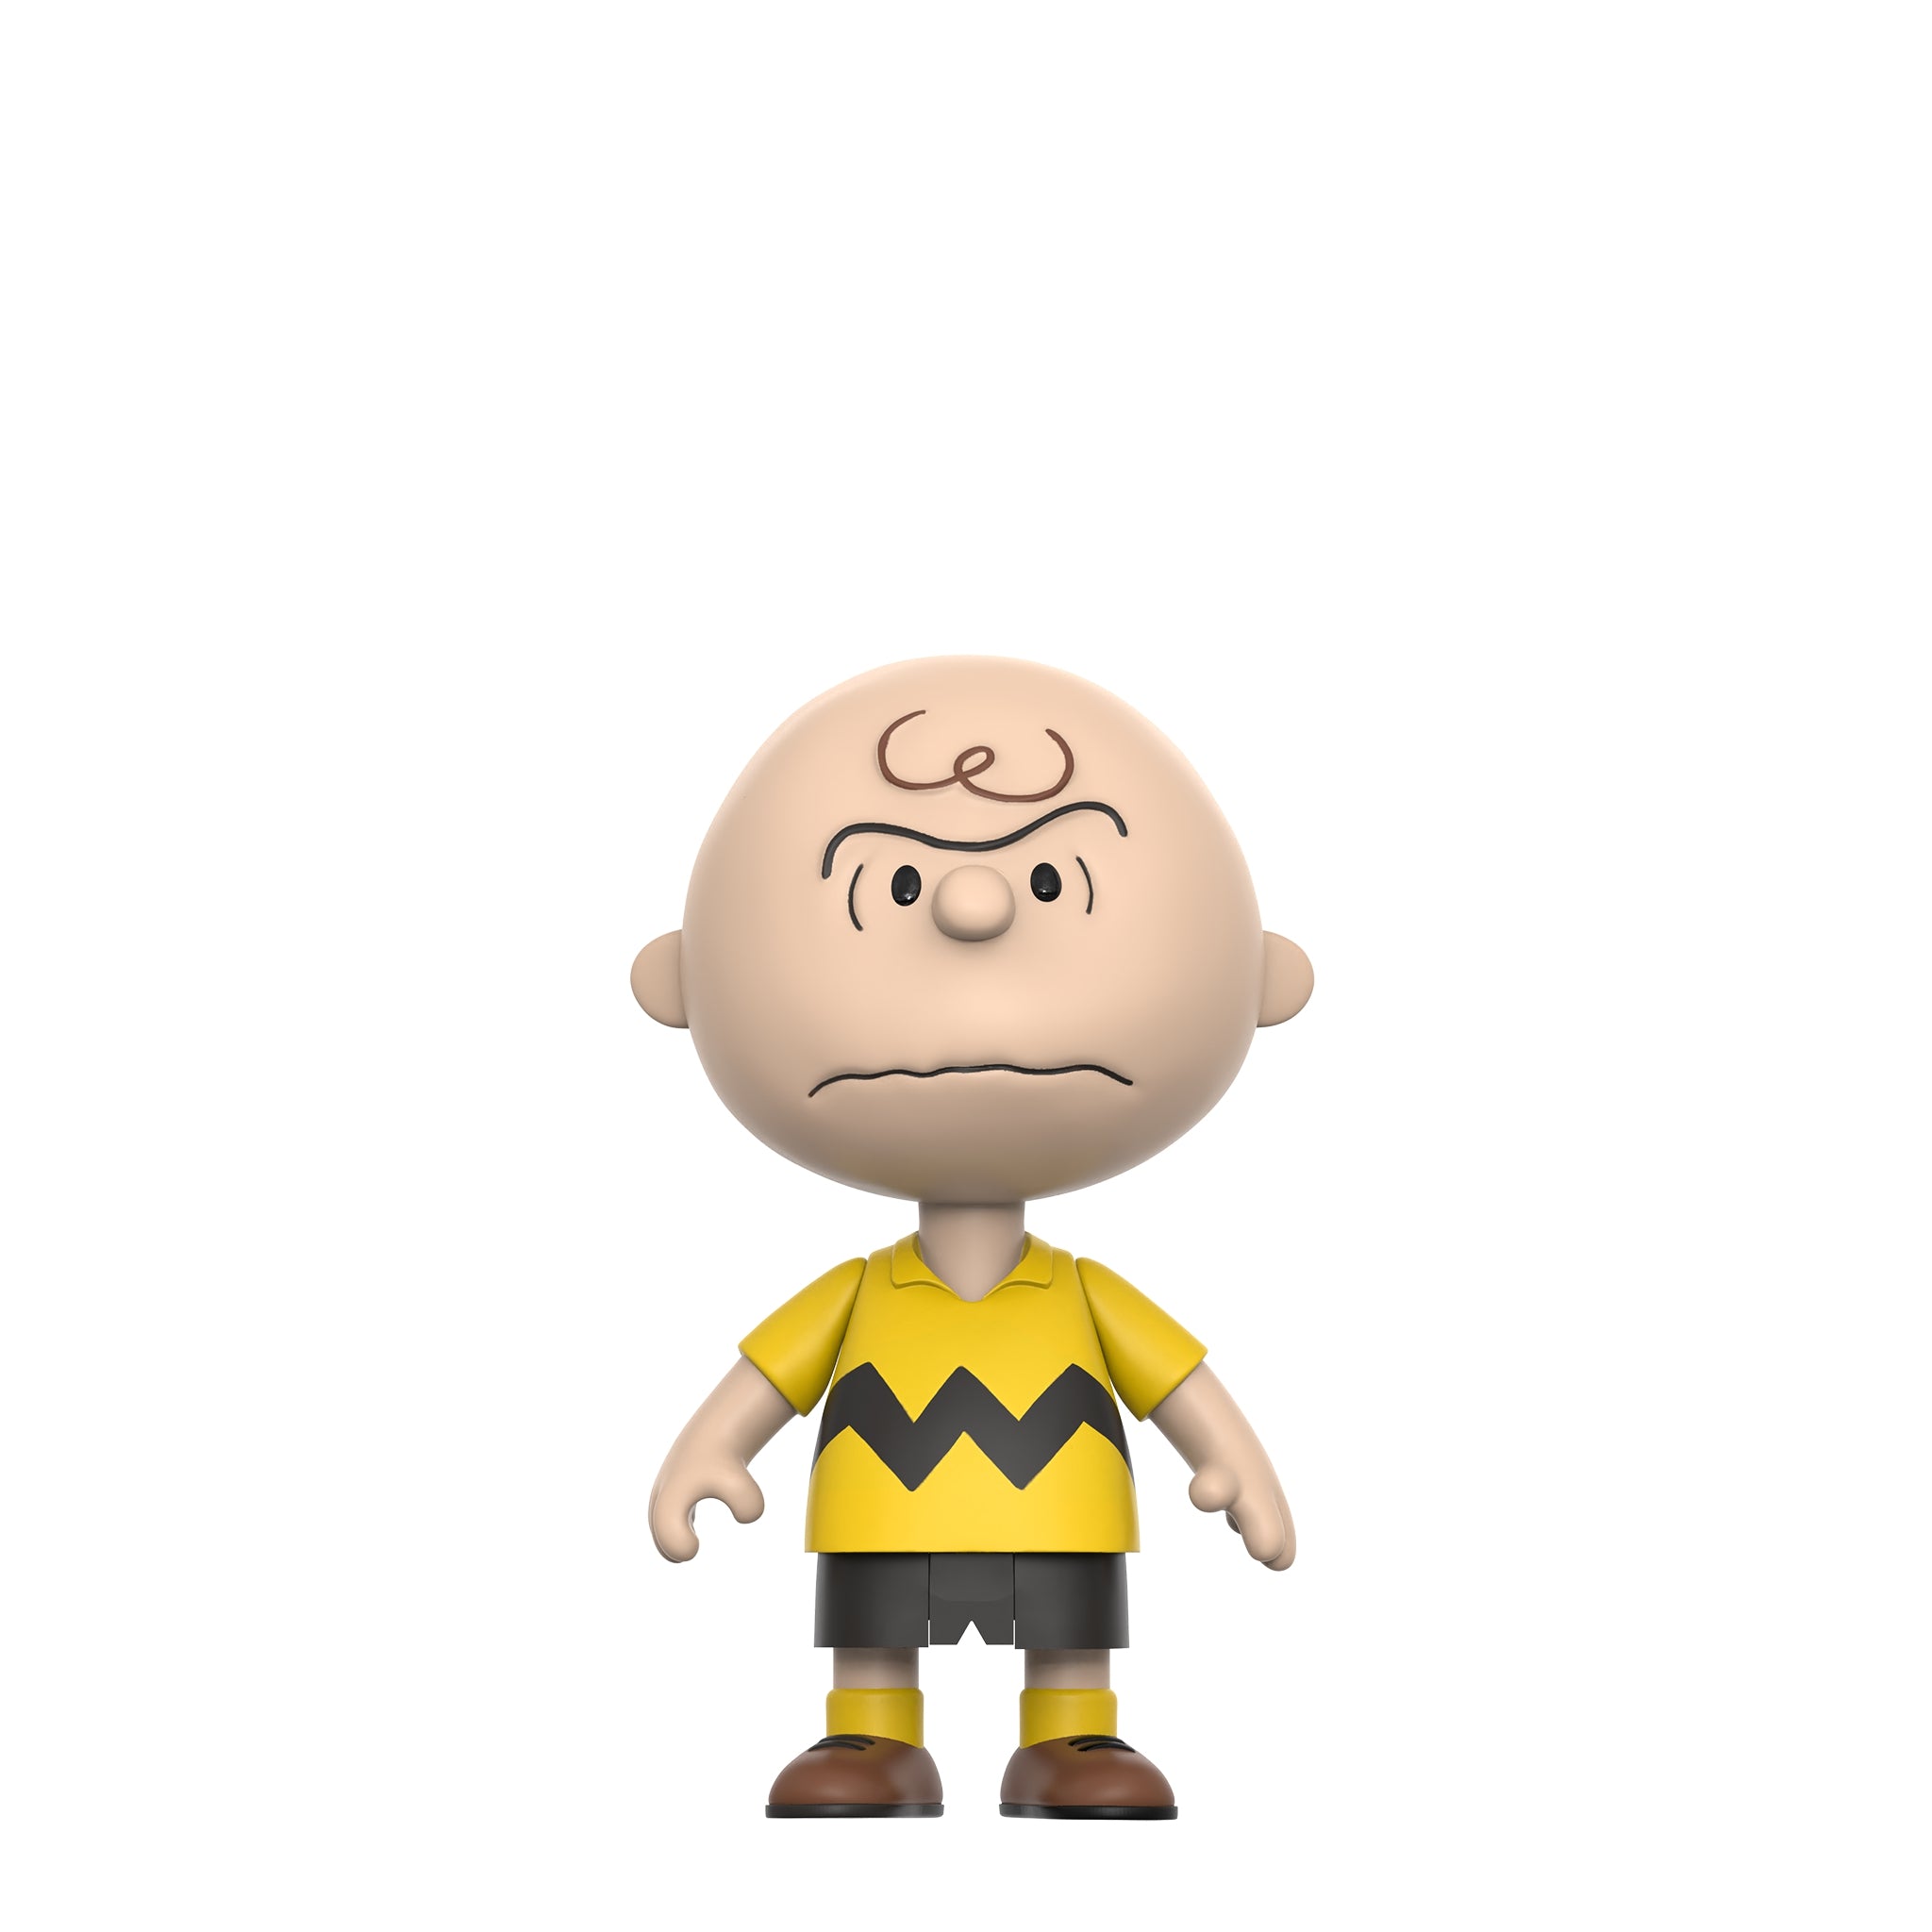 Peanuts ReAction Figures - I Hate Valentine's Day Charlie Brown